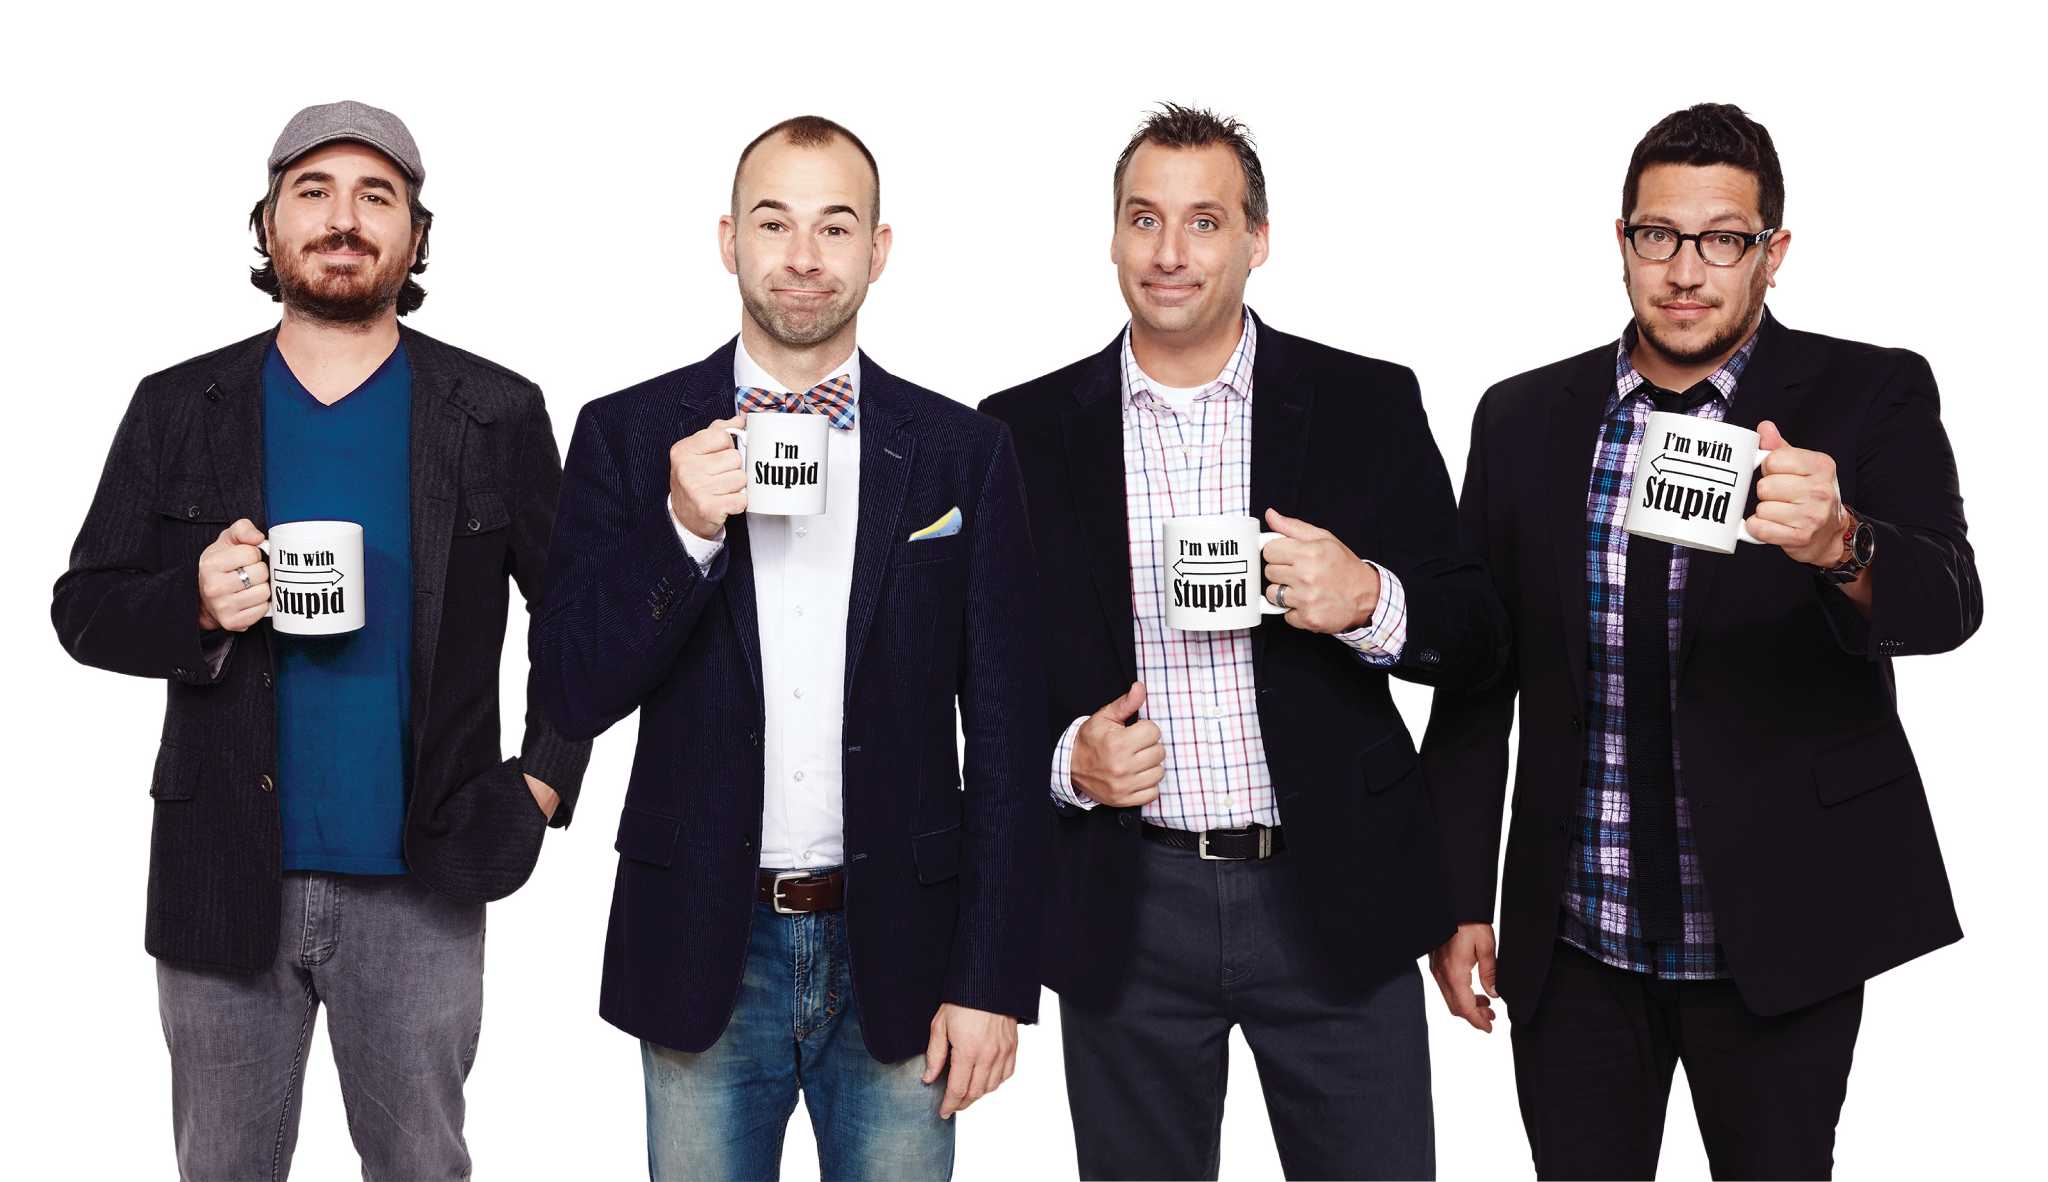 Cast of ‘Impractical Jokers’ brings ‘Where’s Larry? Tour’ to Toyota